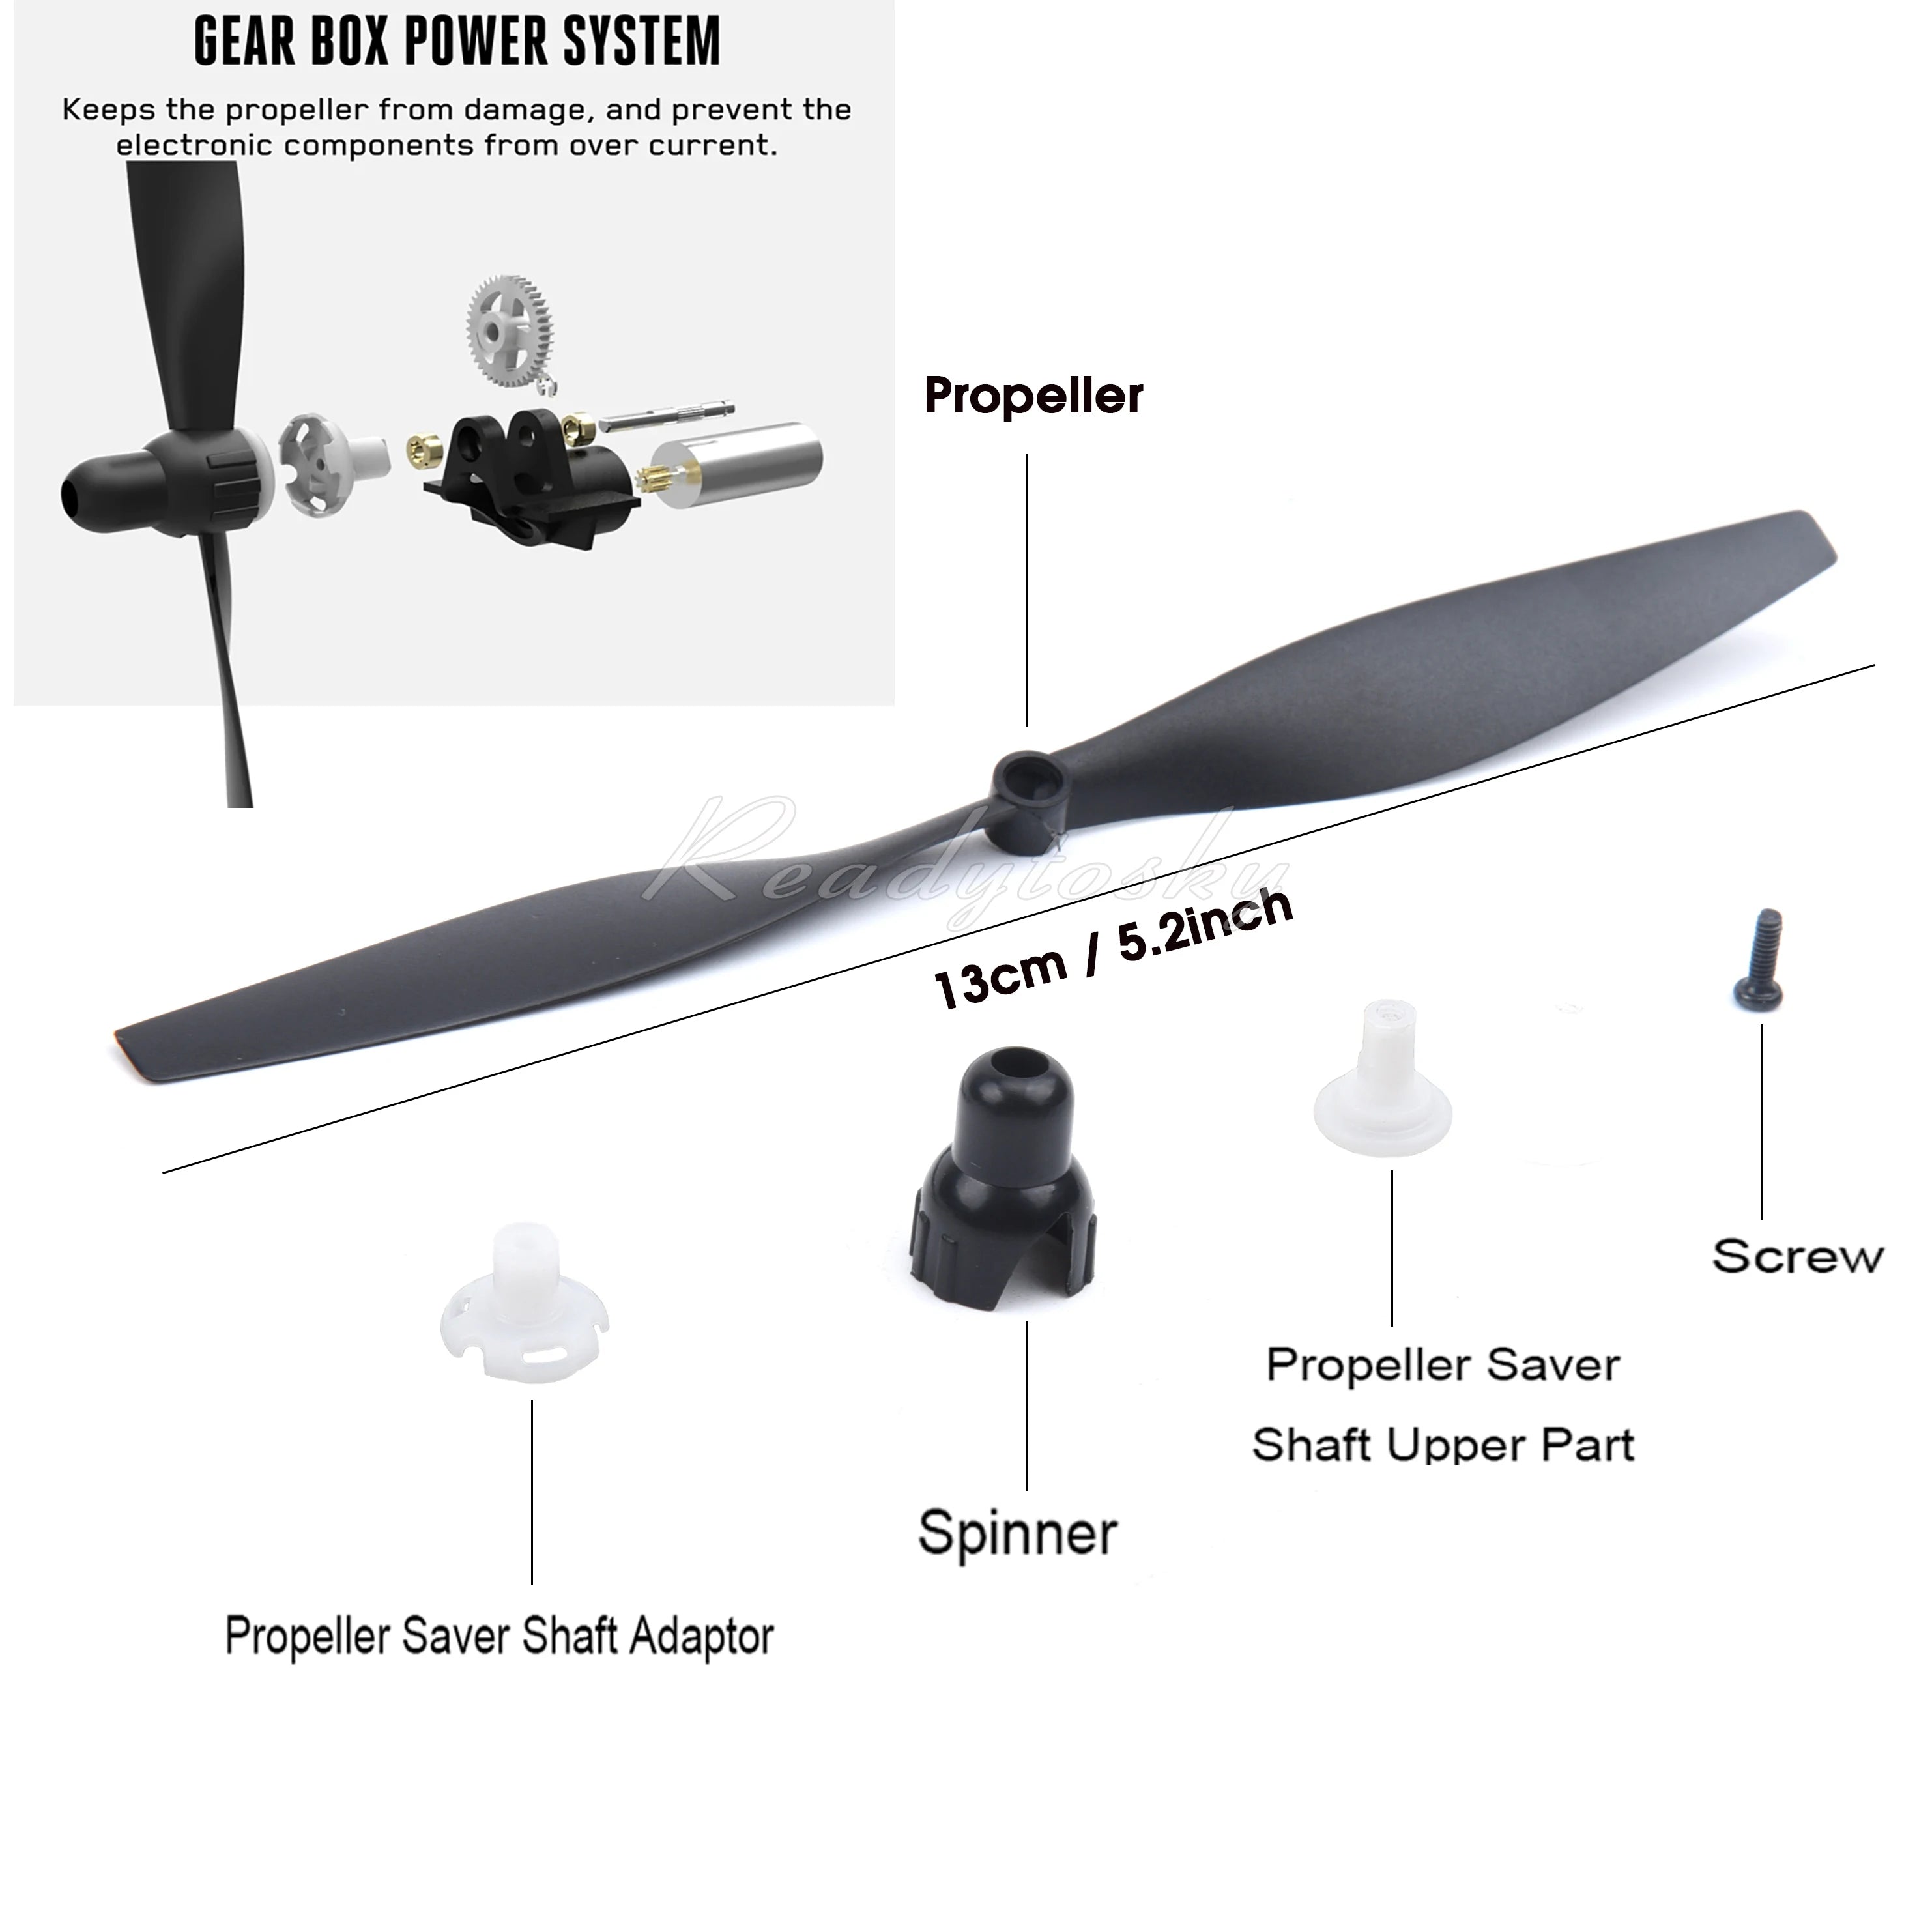 2/4PCs 5.2inch Propeller, GEAR BOX POWER SYSTEM Keeps the propeller from damage, and prevent